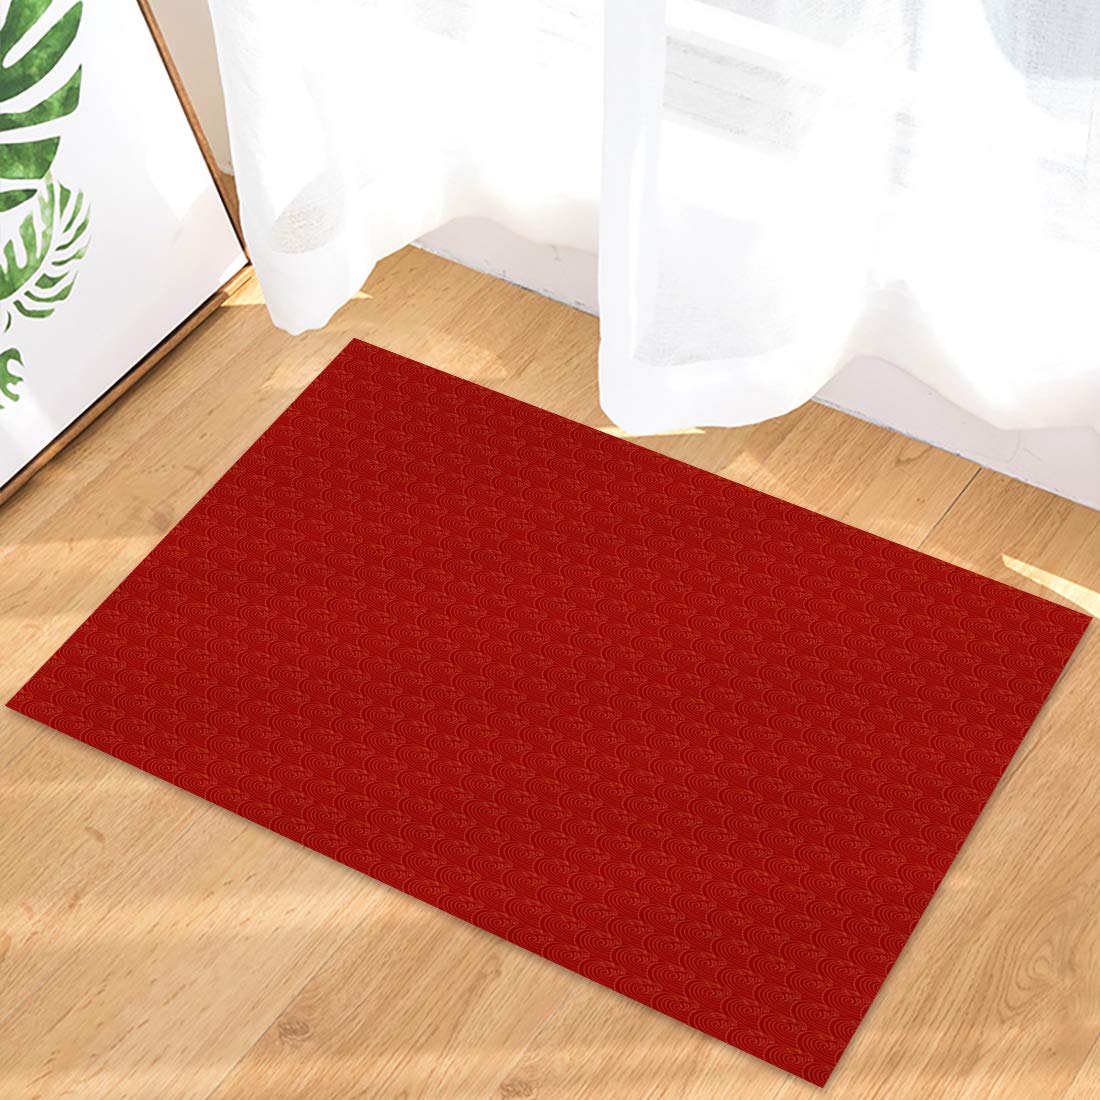 Door Mat for Bedroom Decor, red Waves Floor Mats, Holiday Rugs for Living Room, Absorbent Non-Slip Bathroom Rugs Home Decor Kitchen Mat Area Rug 18x30 Inch